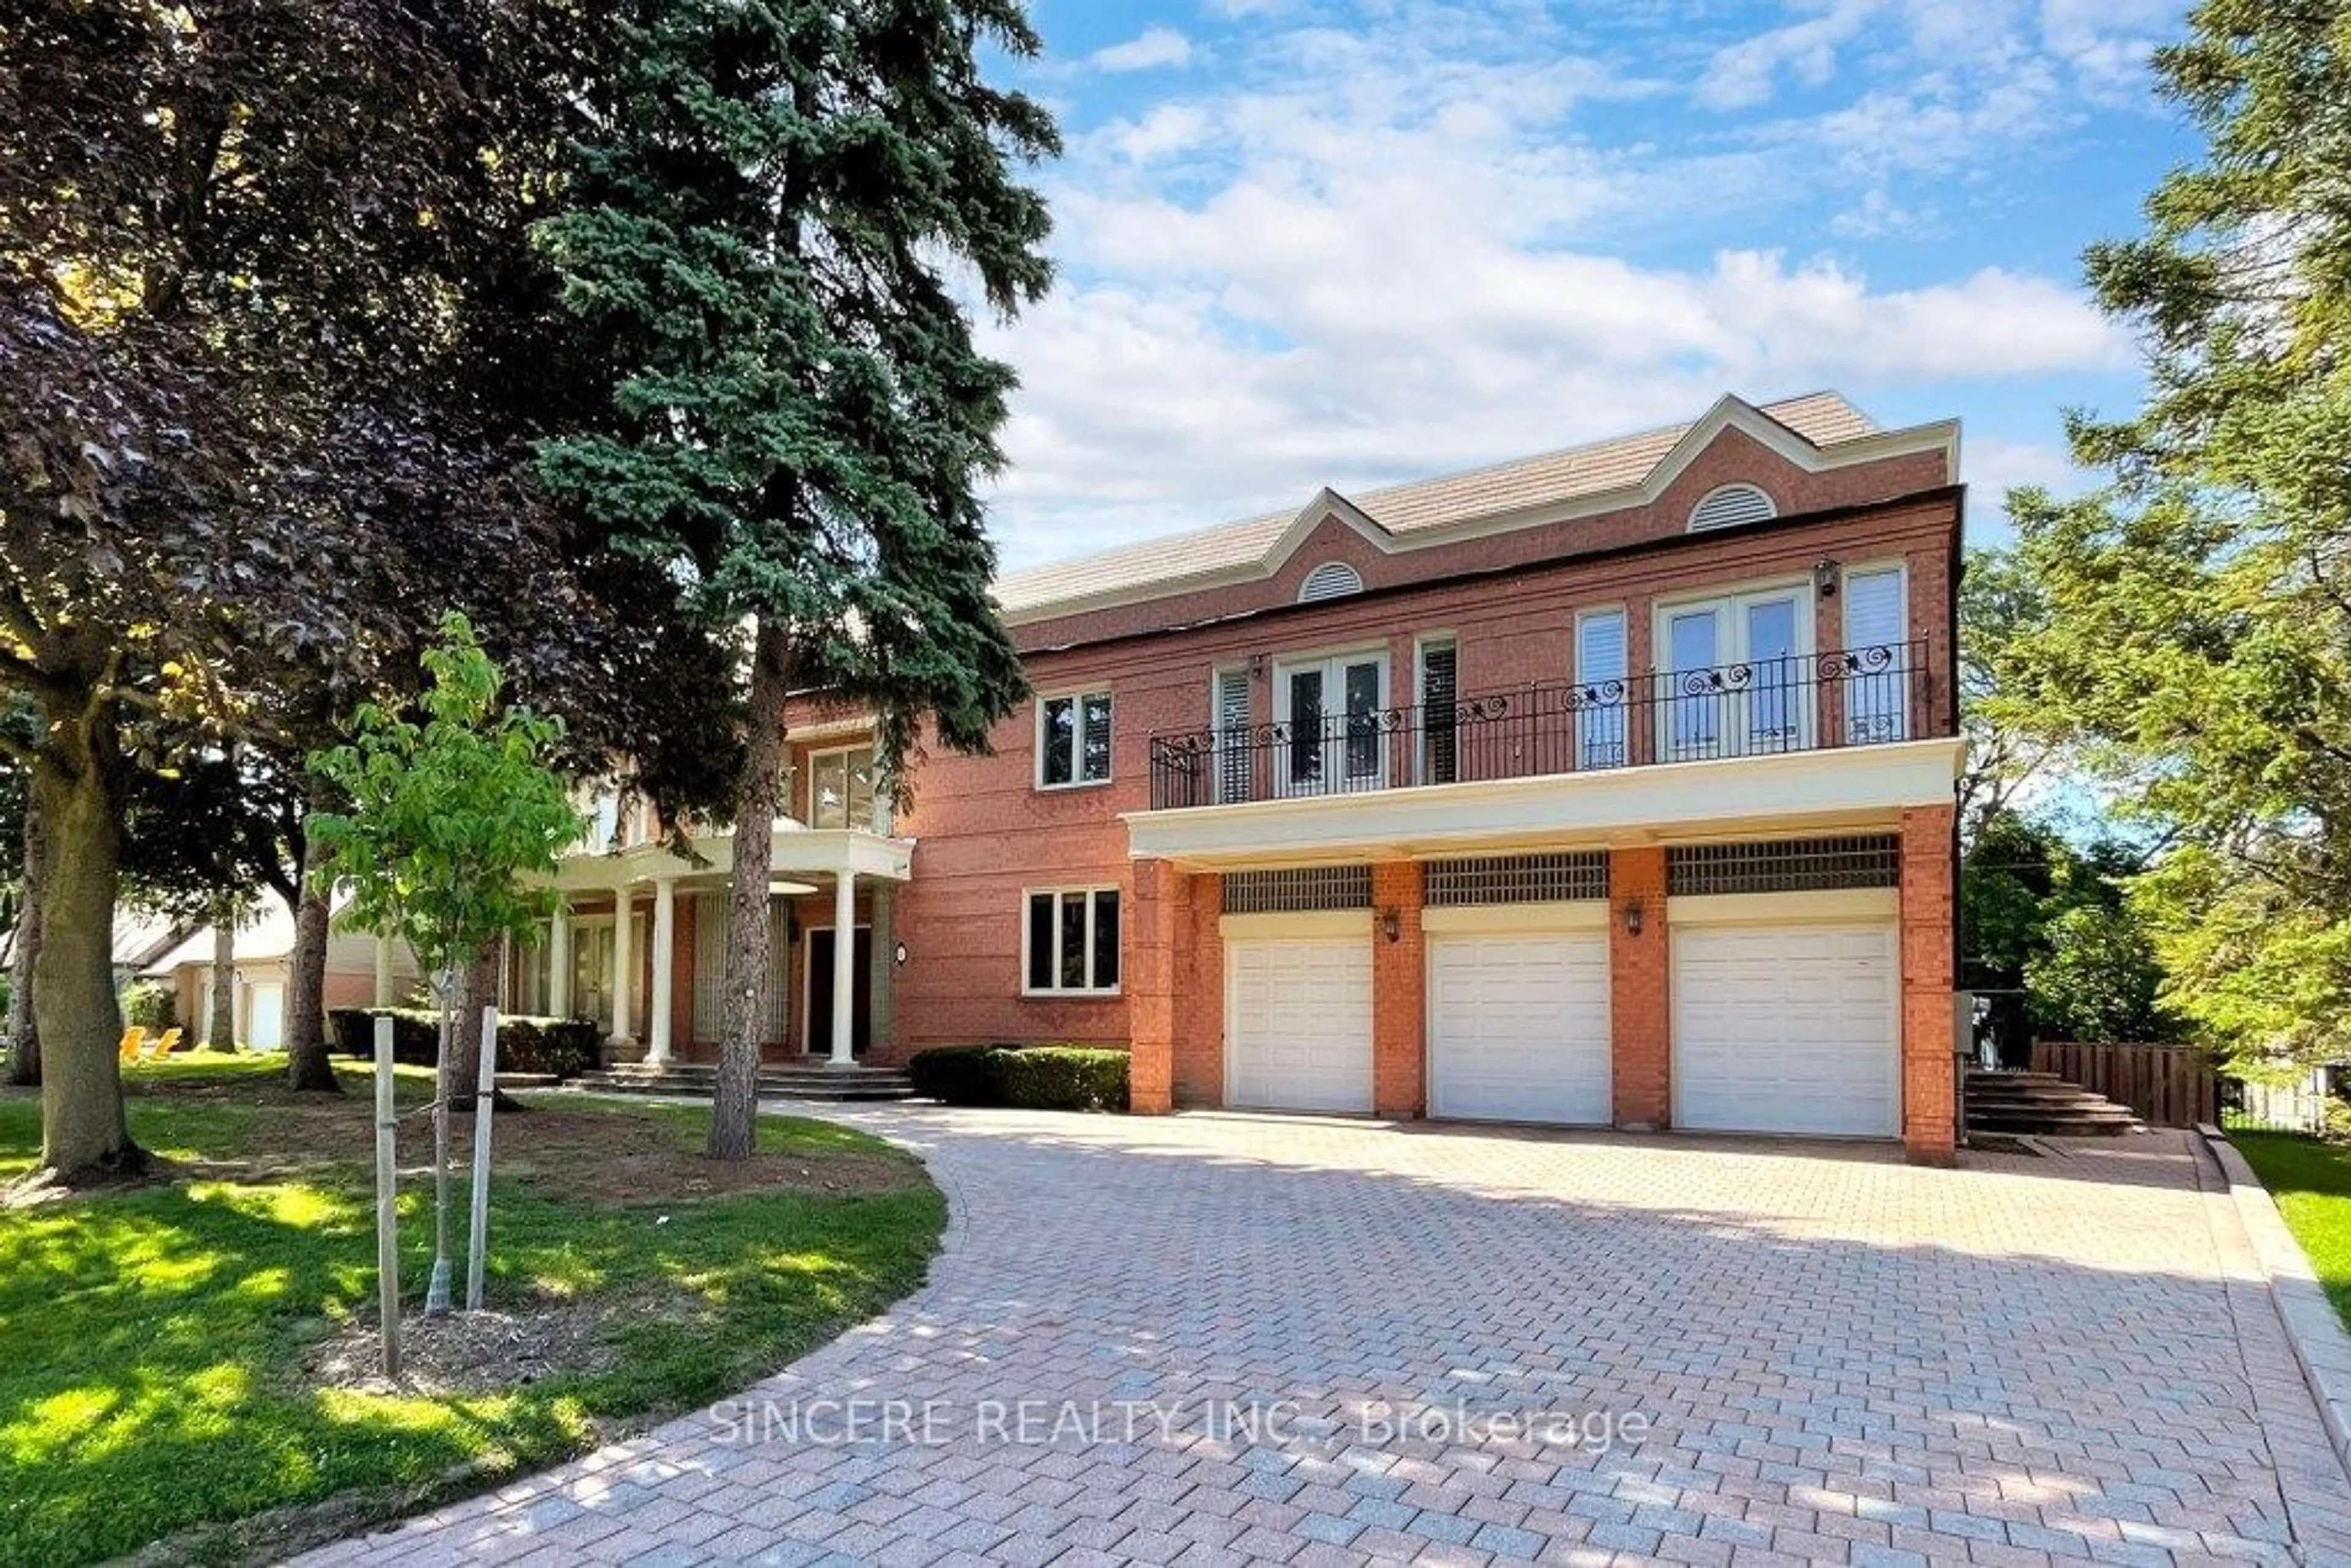 Home with brick exterior material for 6 Huckleberry Lane, Markham Ontario L3T 1C7